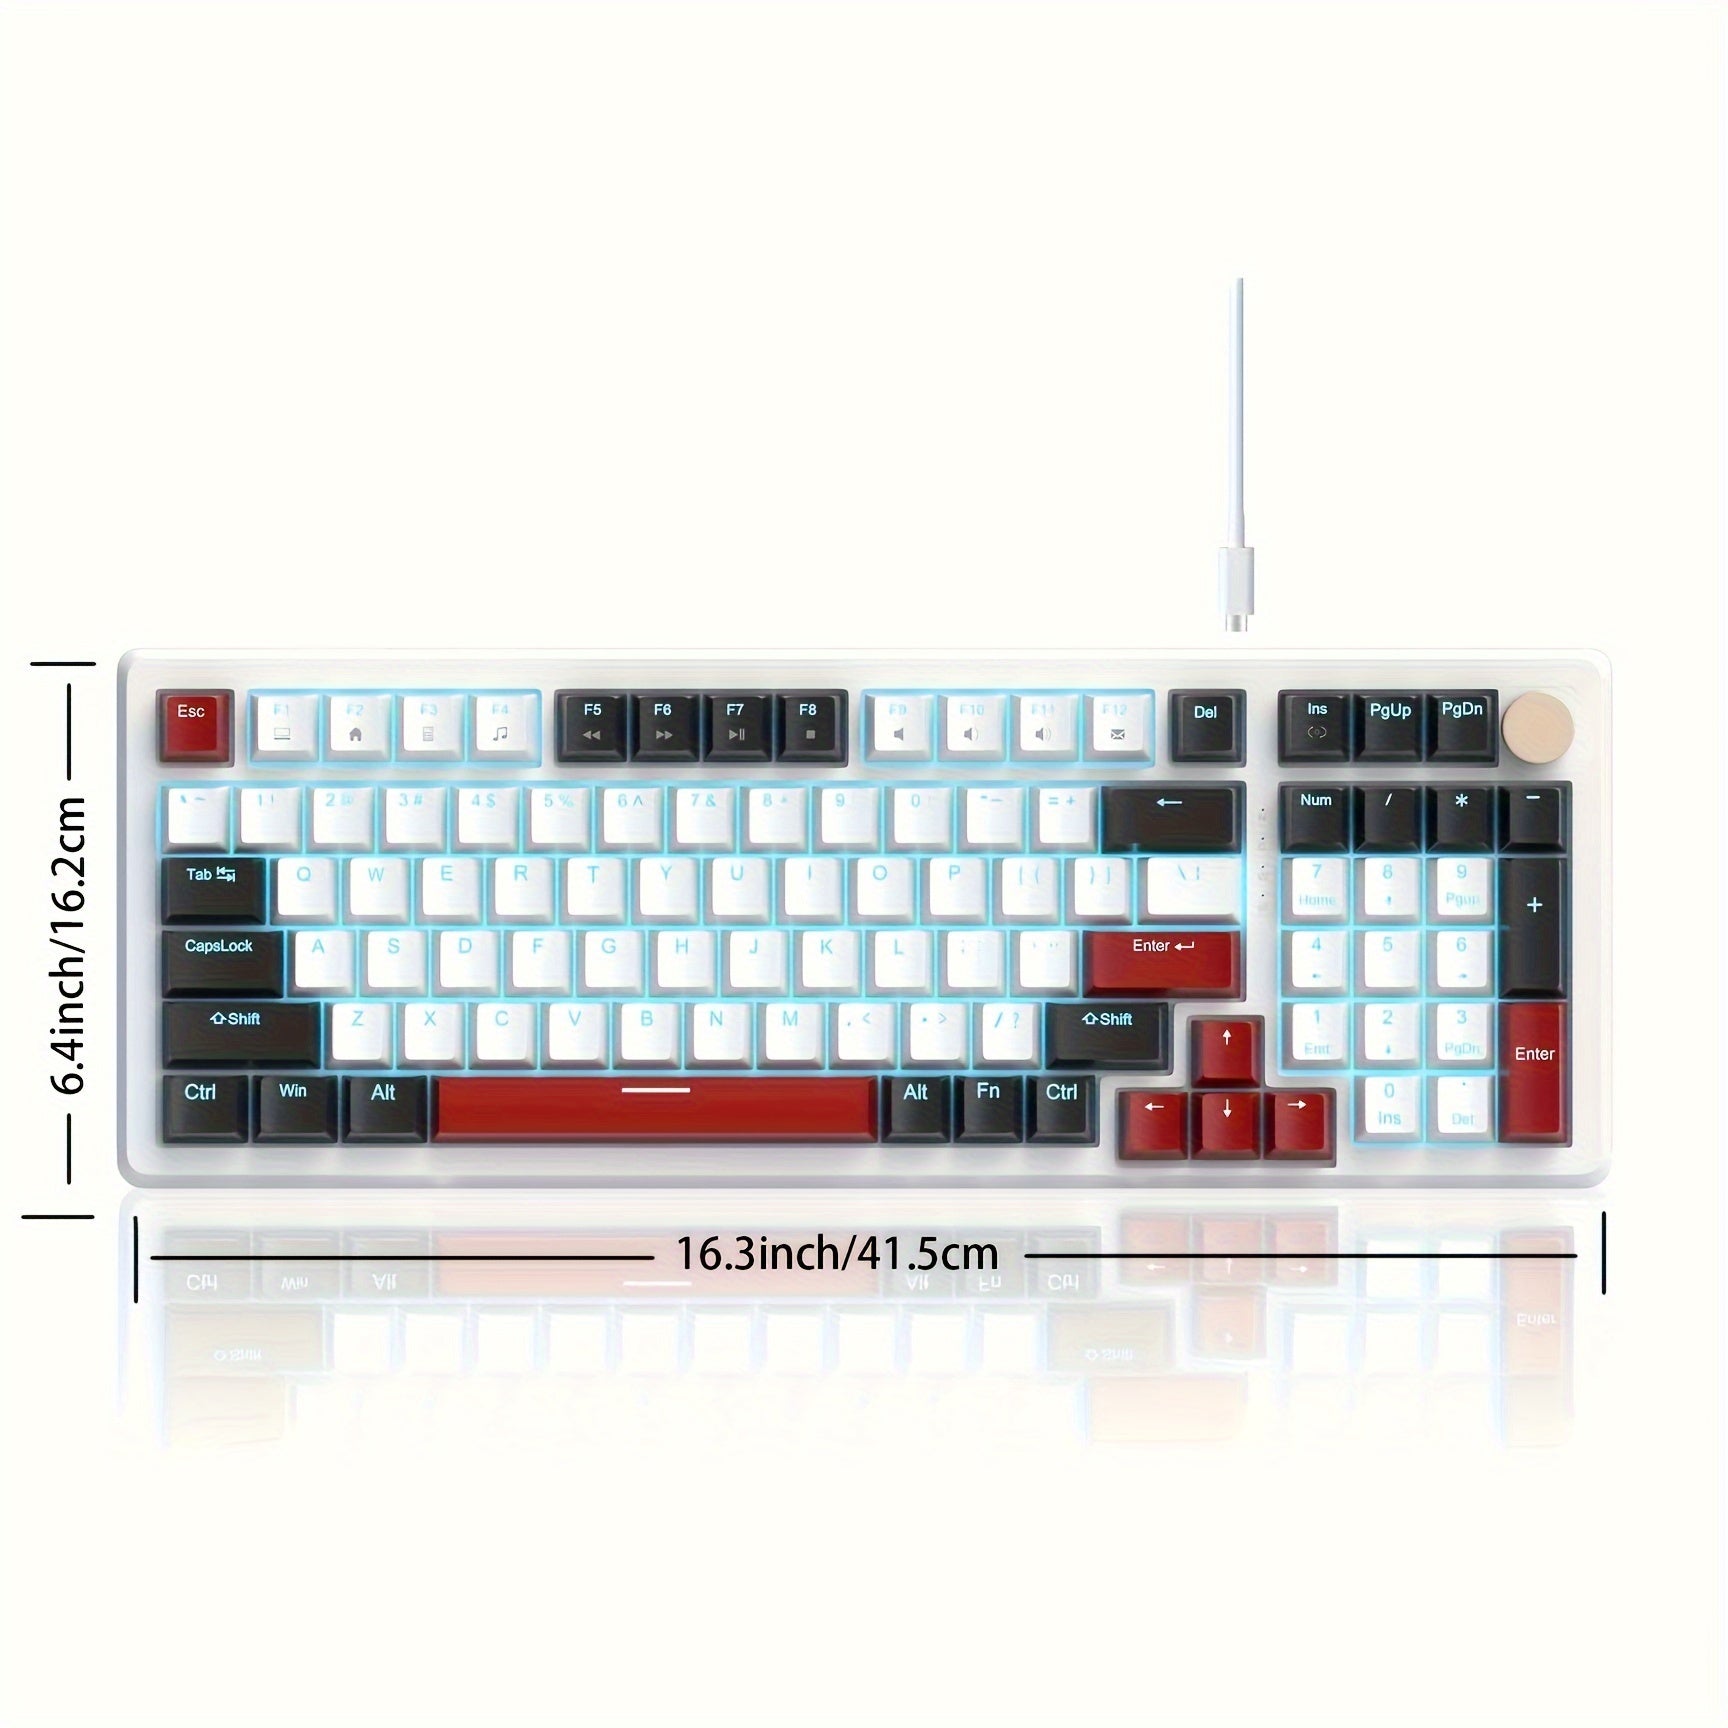 MageGee 98 Keys Mechanical Gaming Keyboard, Brown Switches, 96% Compact Layout LED Blue Backlit Wired Keyboard With Numpad Arrow Keys, For PC Laptop